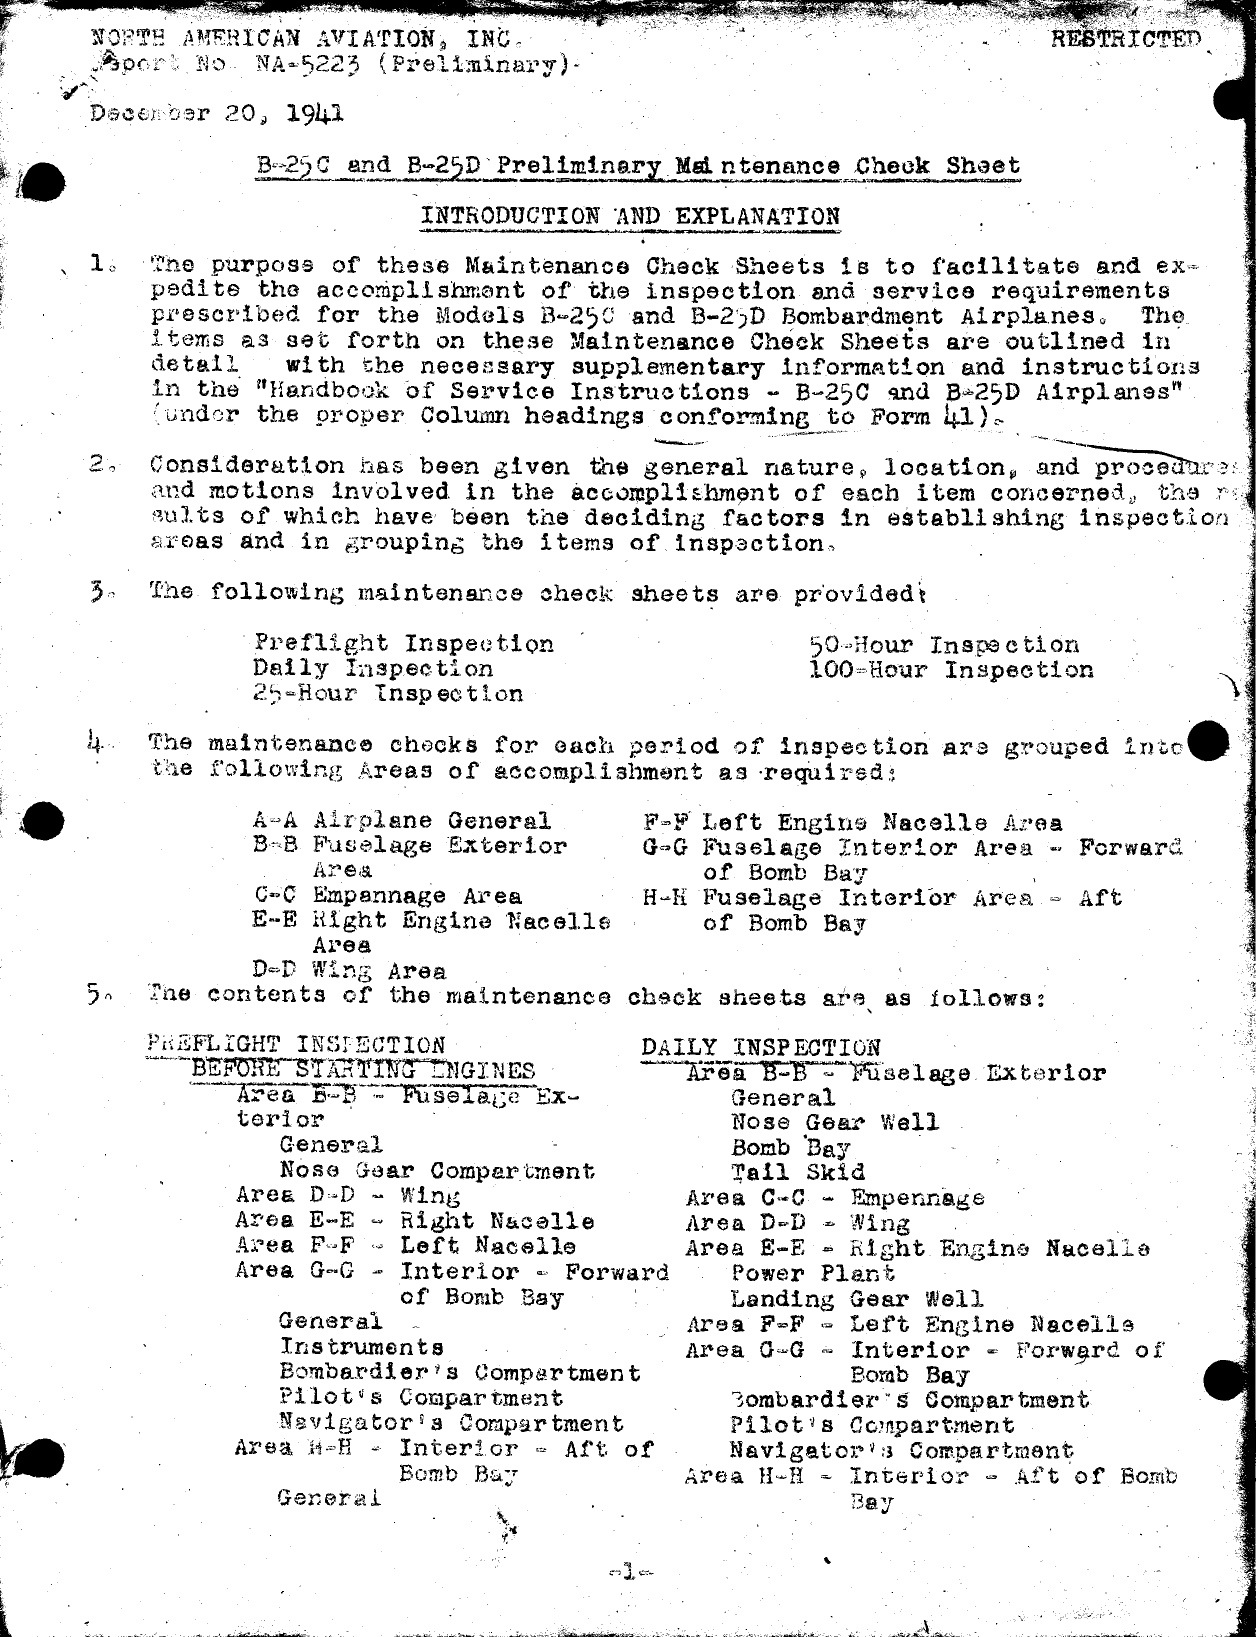 Sample page 1 from AirCorps Library document: Preliminary Maintenance Check Sheet B-25C, B-25D